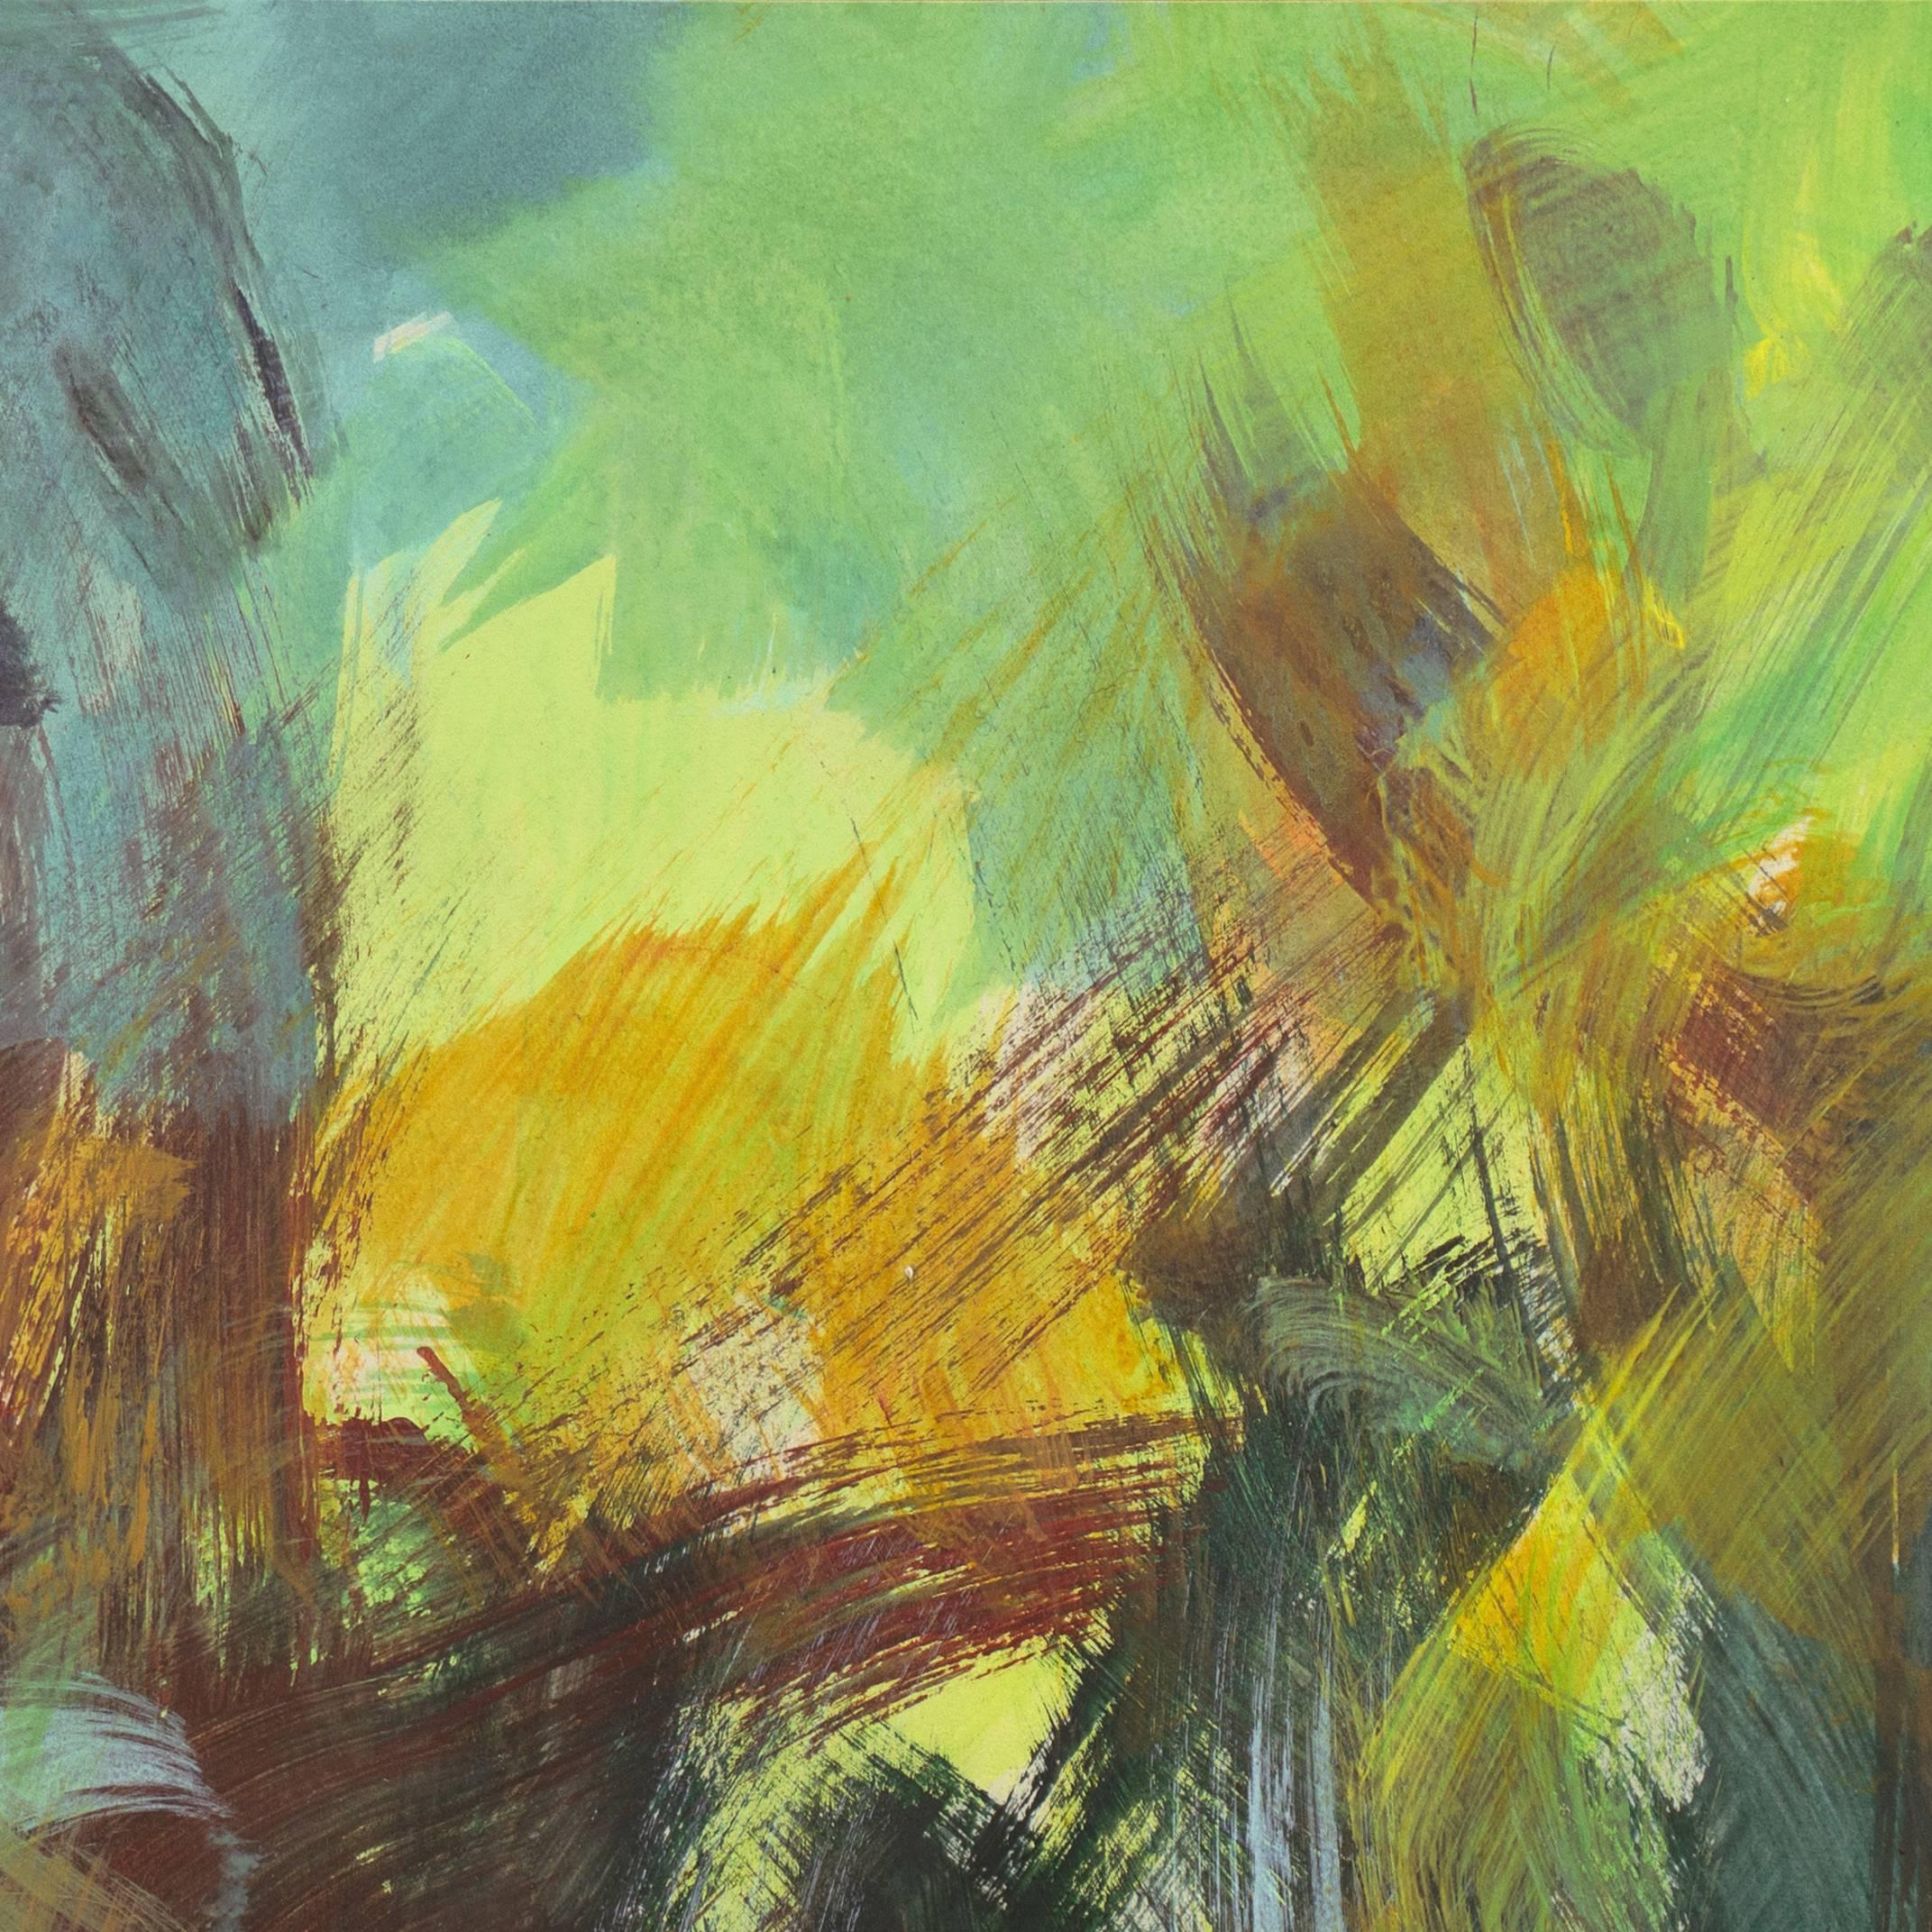 A lyrical, cabinet-size abstract comprising complex striated and overlapping pastel elements of aqua, chartreuse, saffron and jade applied with alla prima brushwork.

Signed lower right, 'Ant'; additionally signed verso, titled 'Sabrina's Wedding